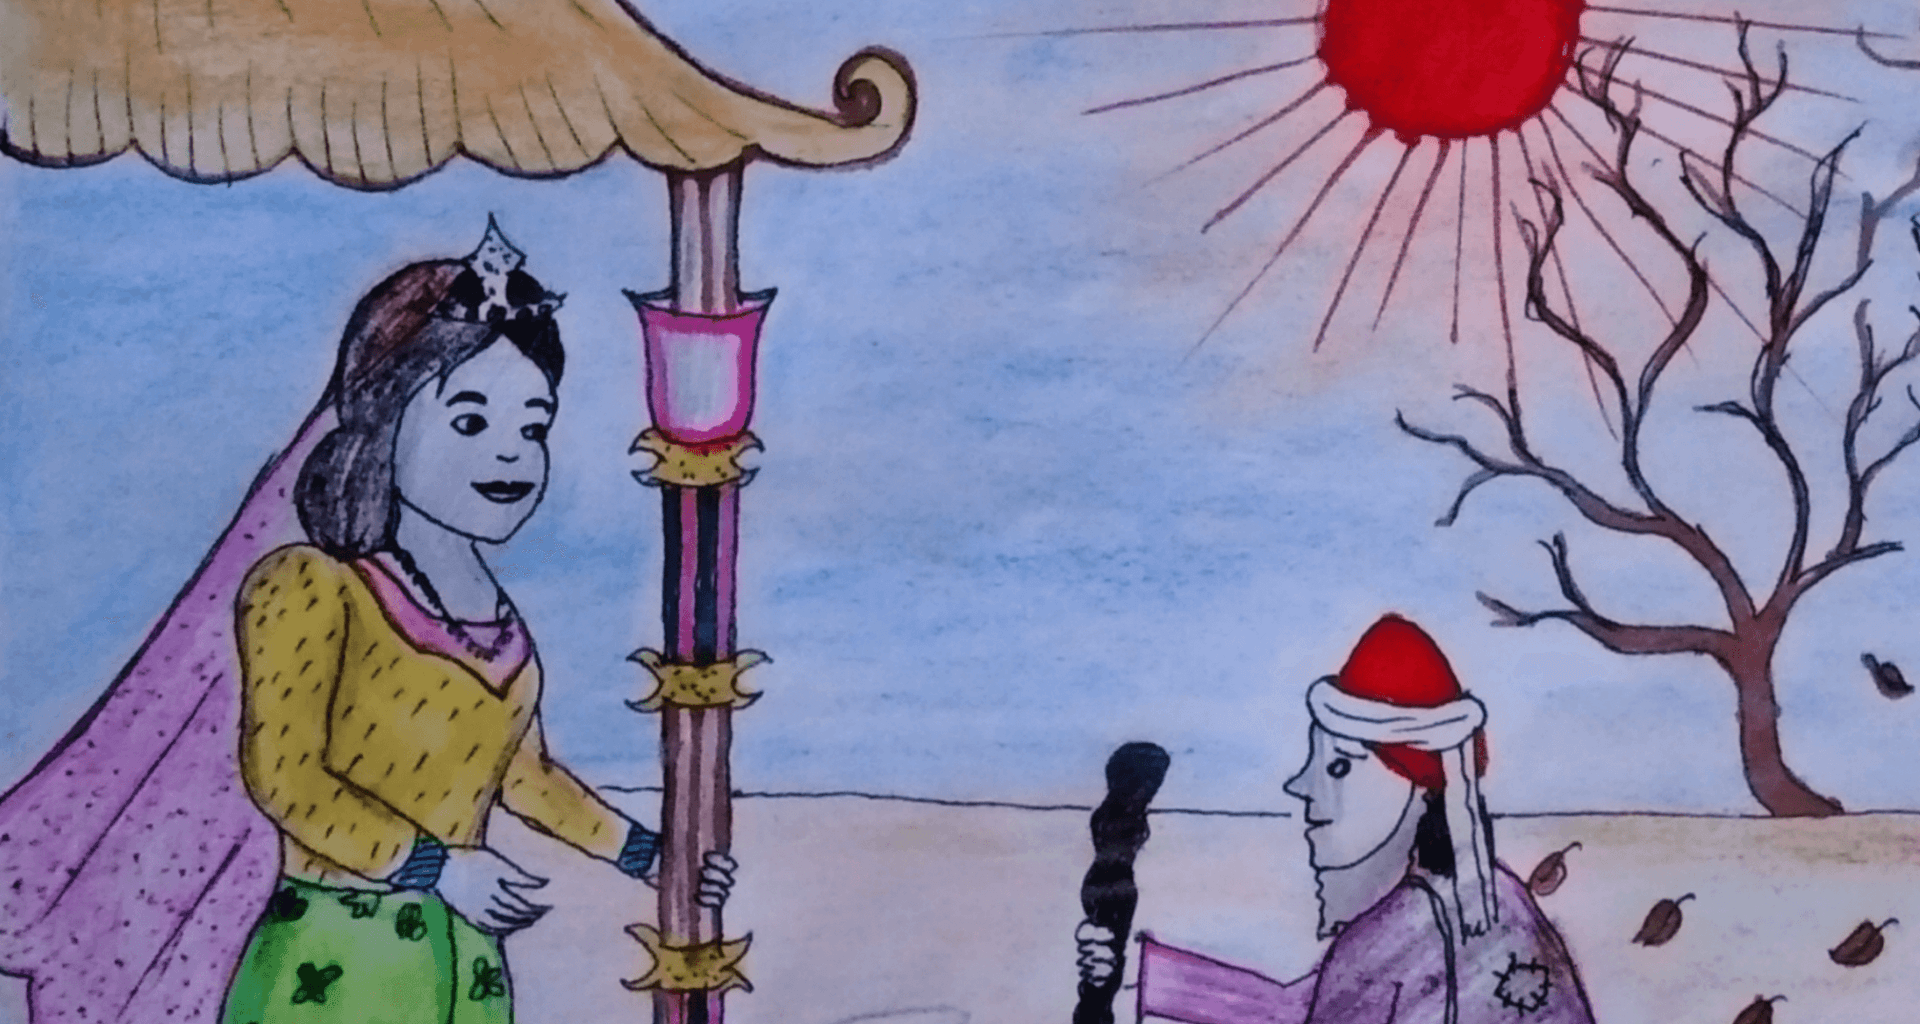 "A Queen's Dream," illustration by Mayyu Khan, a Rohingya artist living in Kutupalong Refugee Camp, from "Rohingya Folk Tales," by Mohammed Rezuwan.